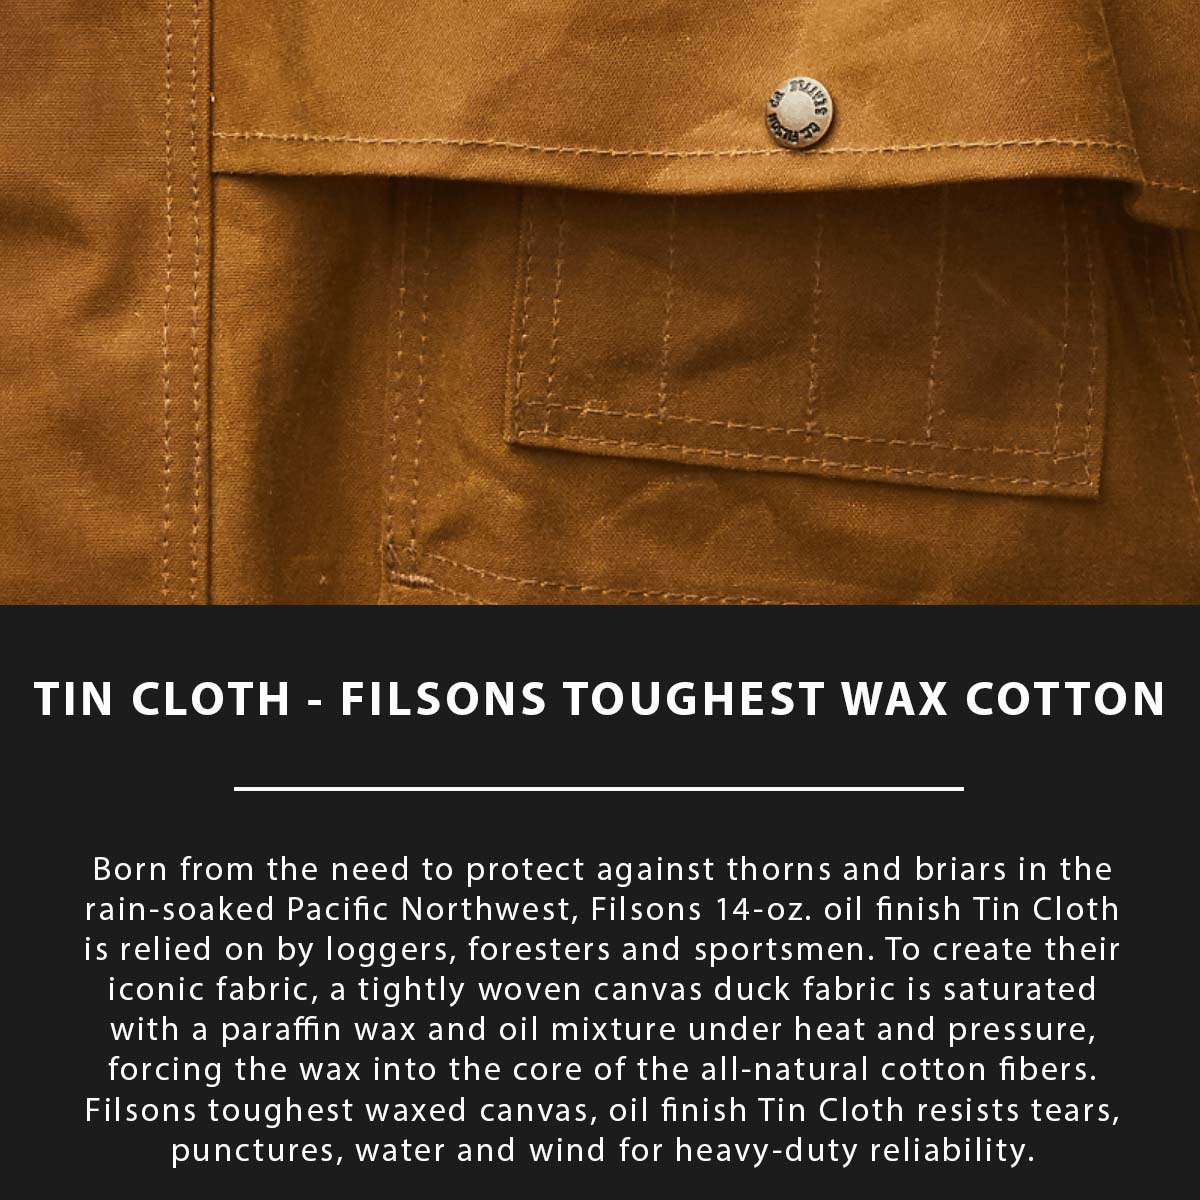 Filson Tin Cloth Insulated Work Vest Dark Tan, made of the legendary super strong, lightweight, and oil impregnated 14-oz. Tin Cloth canvas